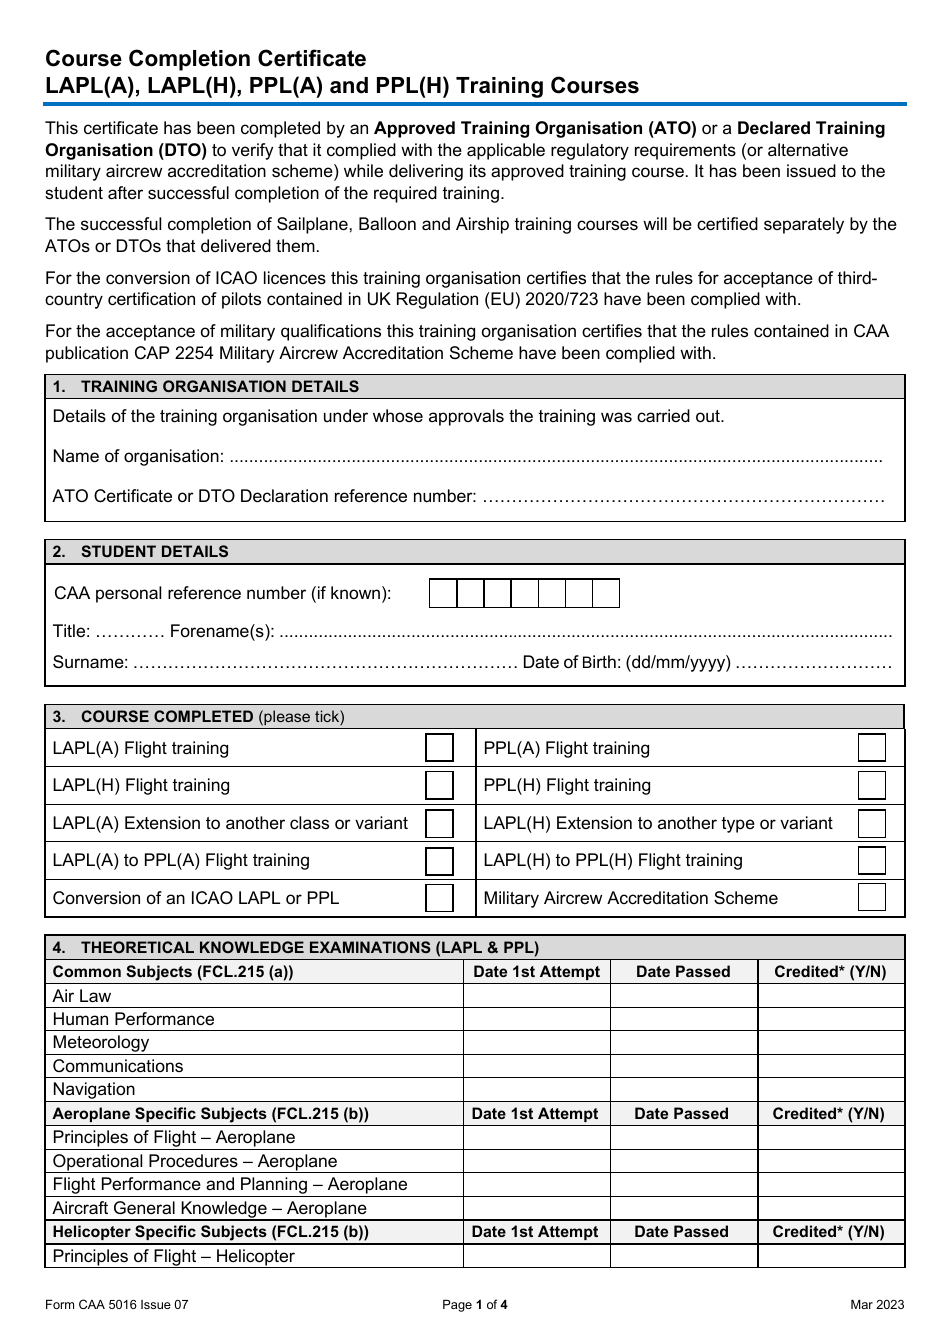 Form CAA5016 Course Completion Certificate - Lapl(A), Lapl(H), Ppl(A) and Ppl(H) Training Courses - United Kingdom, Page 1